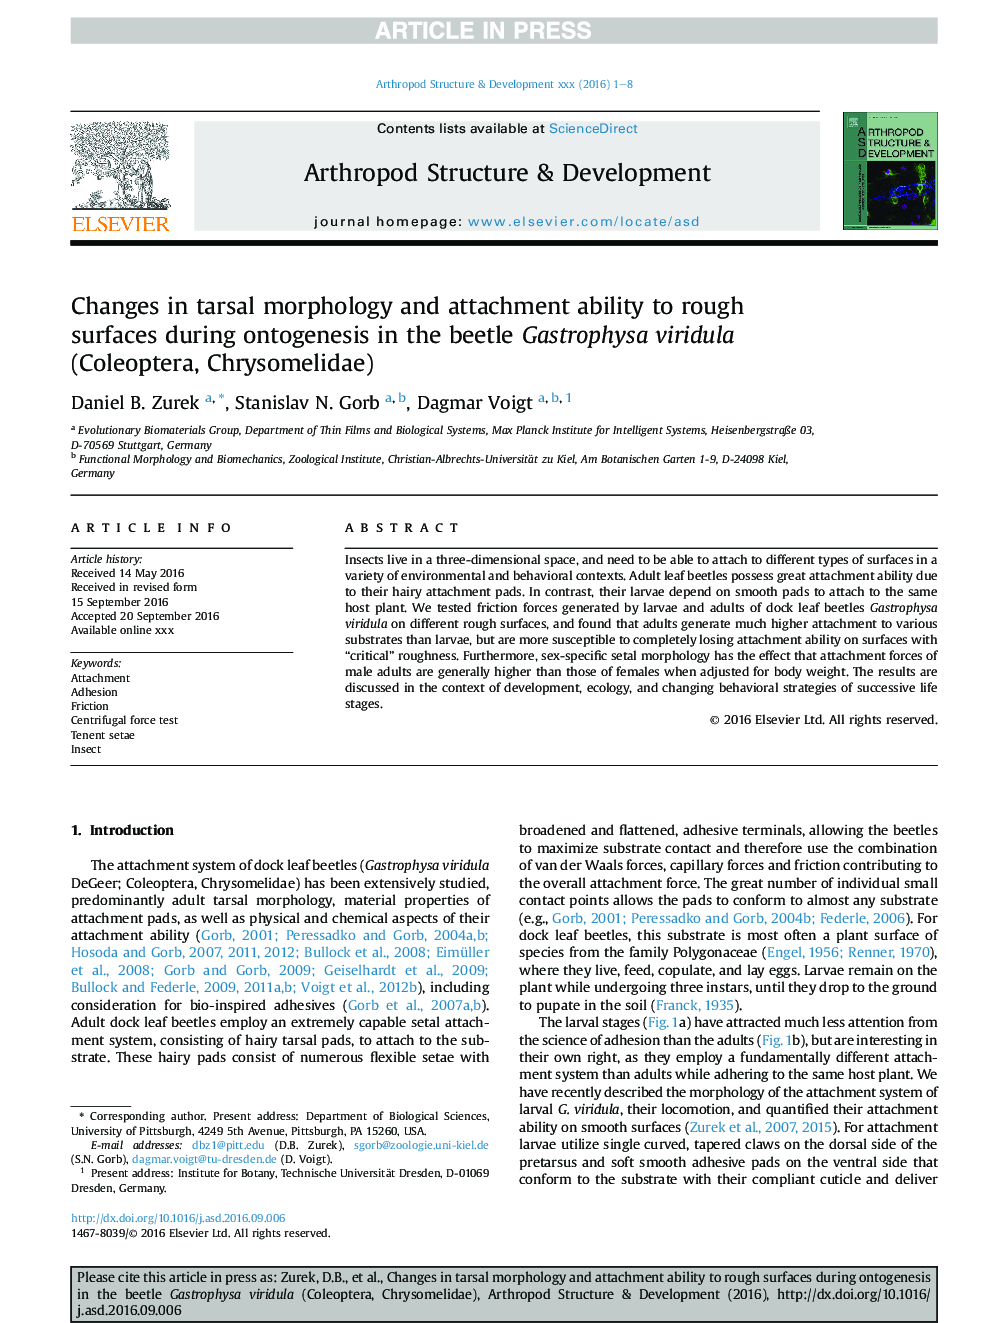 Changes in tarsal morphology and attachment ability to rough surfaces during ontogenesis in the beetle Gastrophysa viridula (Coleoptera, Chrysomelidae)